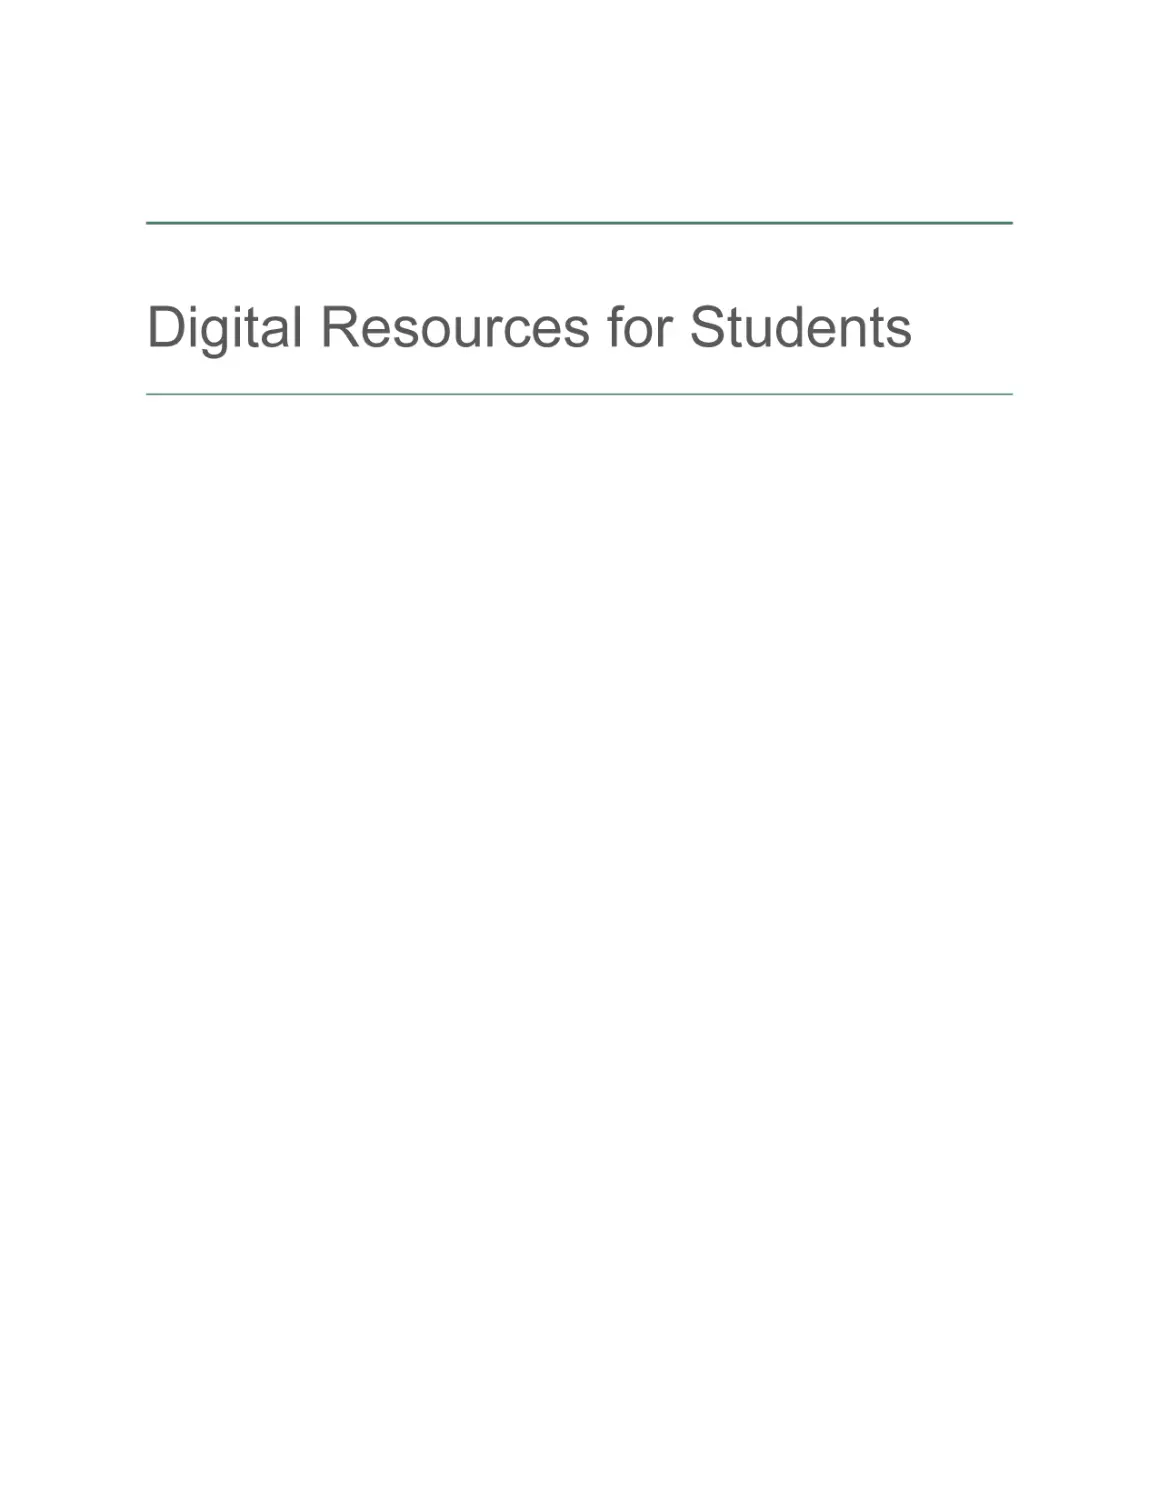 Digital Resources for Students